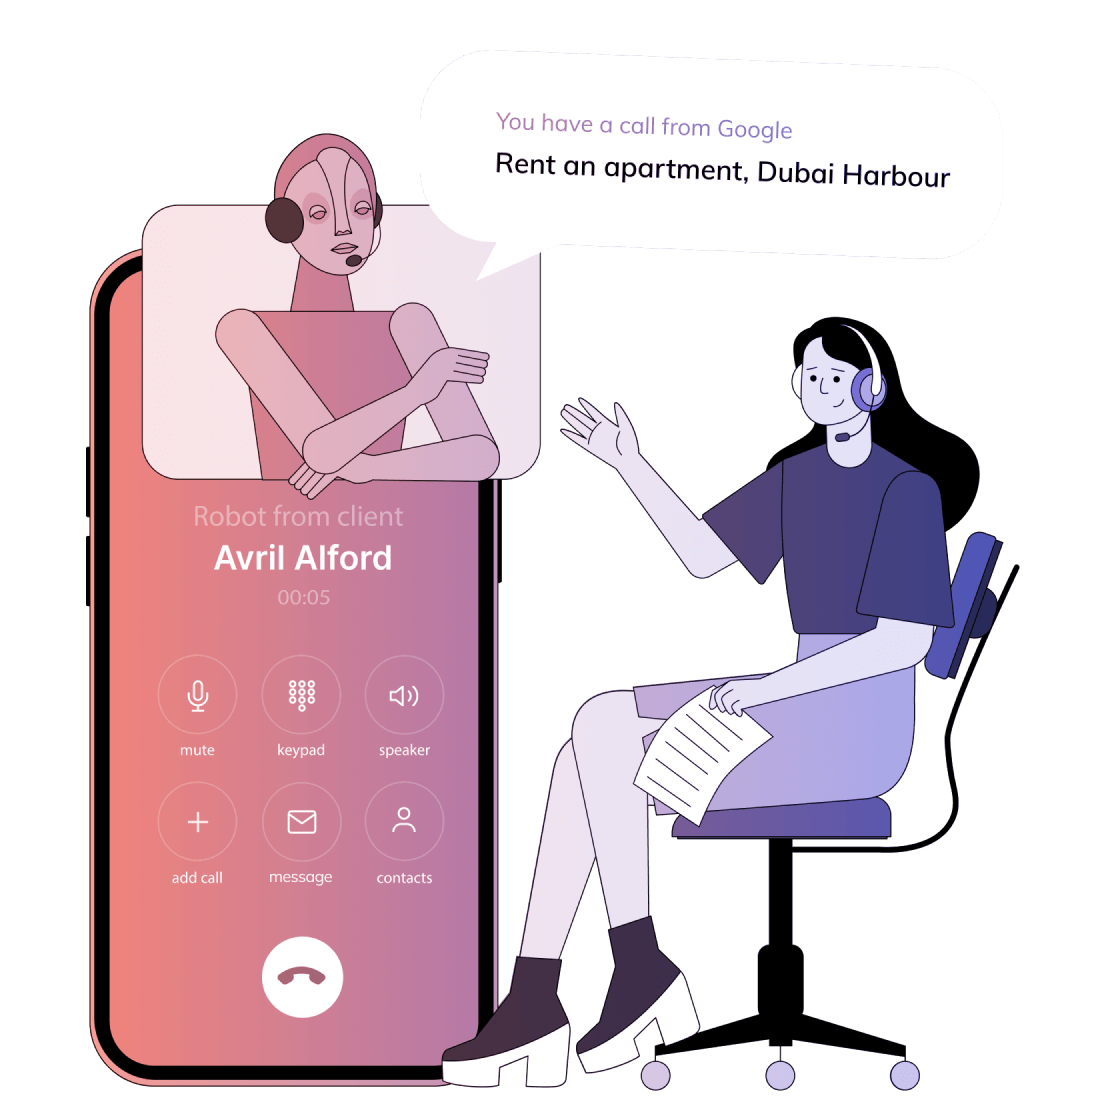 Whisper Messages provide you with data on a caller before the call even begins